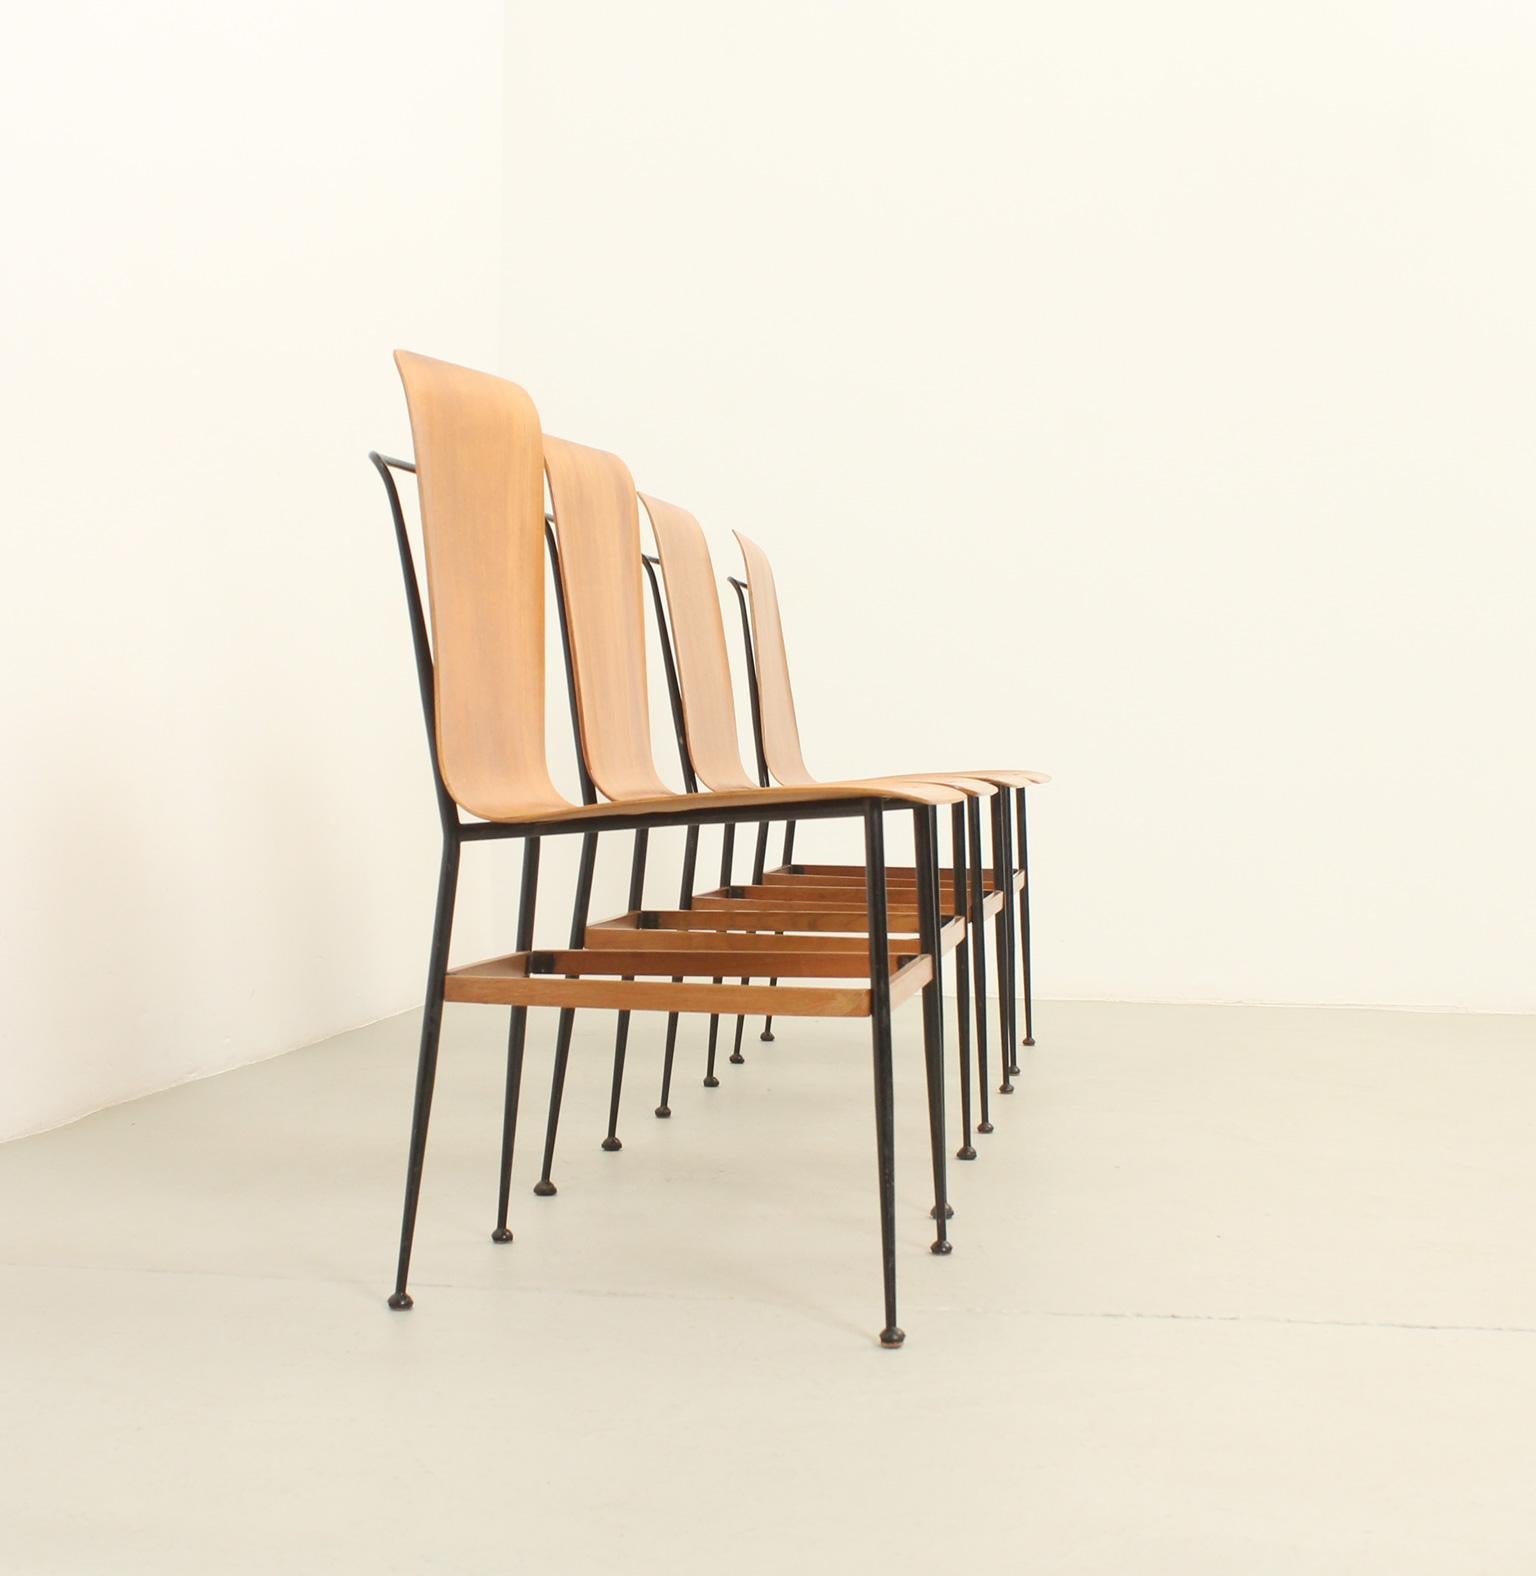 Plywood Dining Chairs by Carlo Ratti, Italy, 1950s For Sale 2